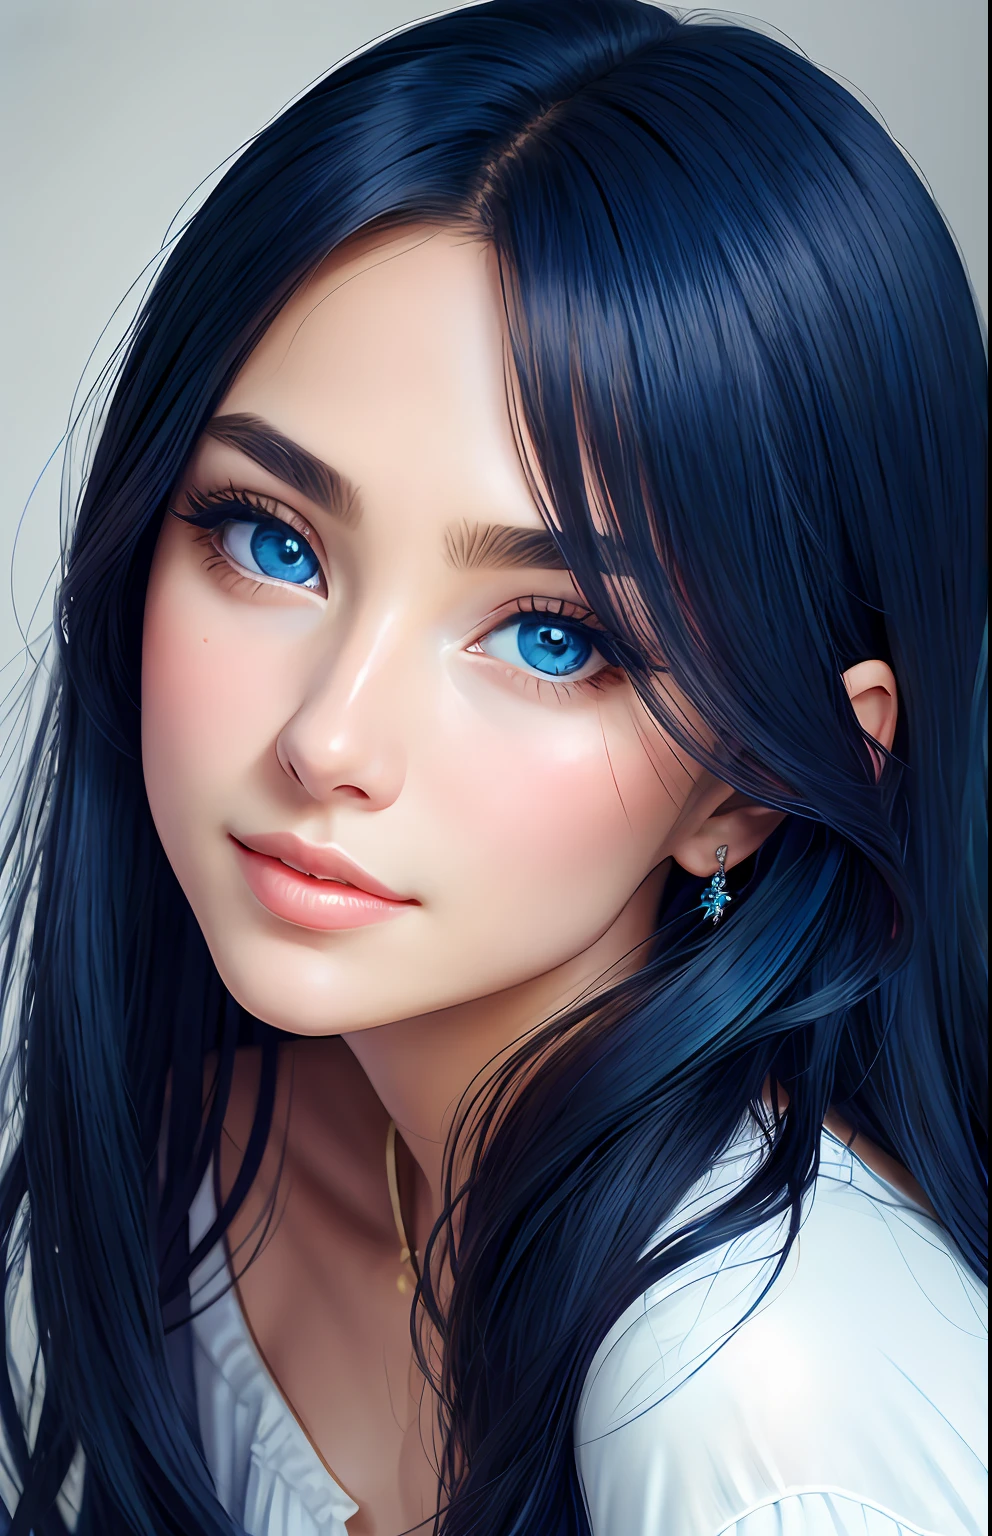 animesque、portraitures、One Person１８Pretty Woman、Moisturized eyes、Casual clothing、a picture、oval jaw、beautiful countenance、The hair、Blue eyes with a beautiful glow、LDS Art